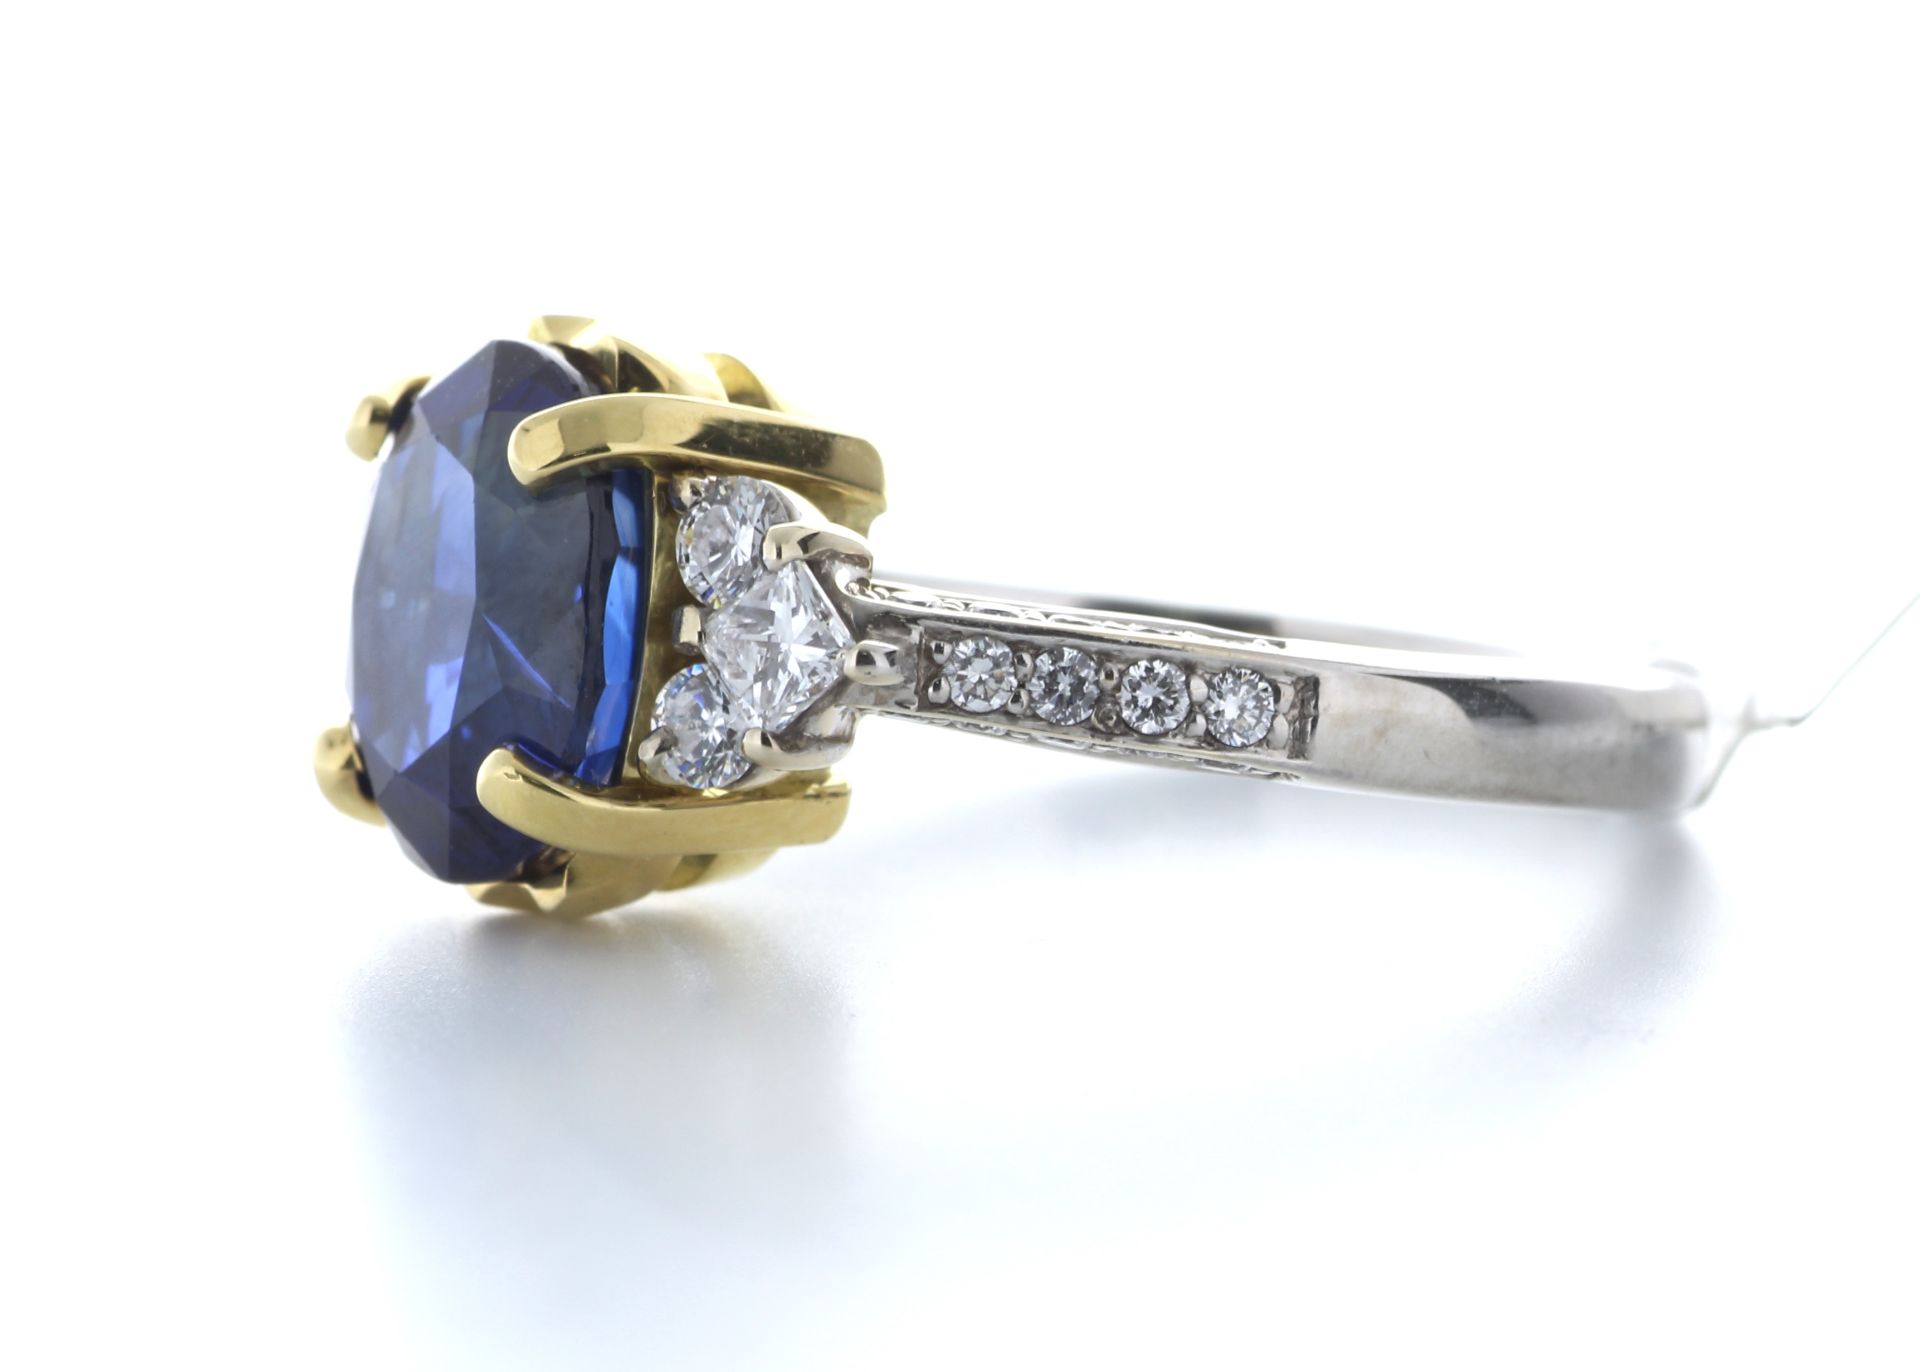 18ct White Gold Single Stone 4.85 Carat Sapphire Claw Set With Stone Set Shoulders Diamond Ring - Image 2 of 2